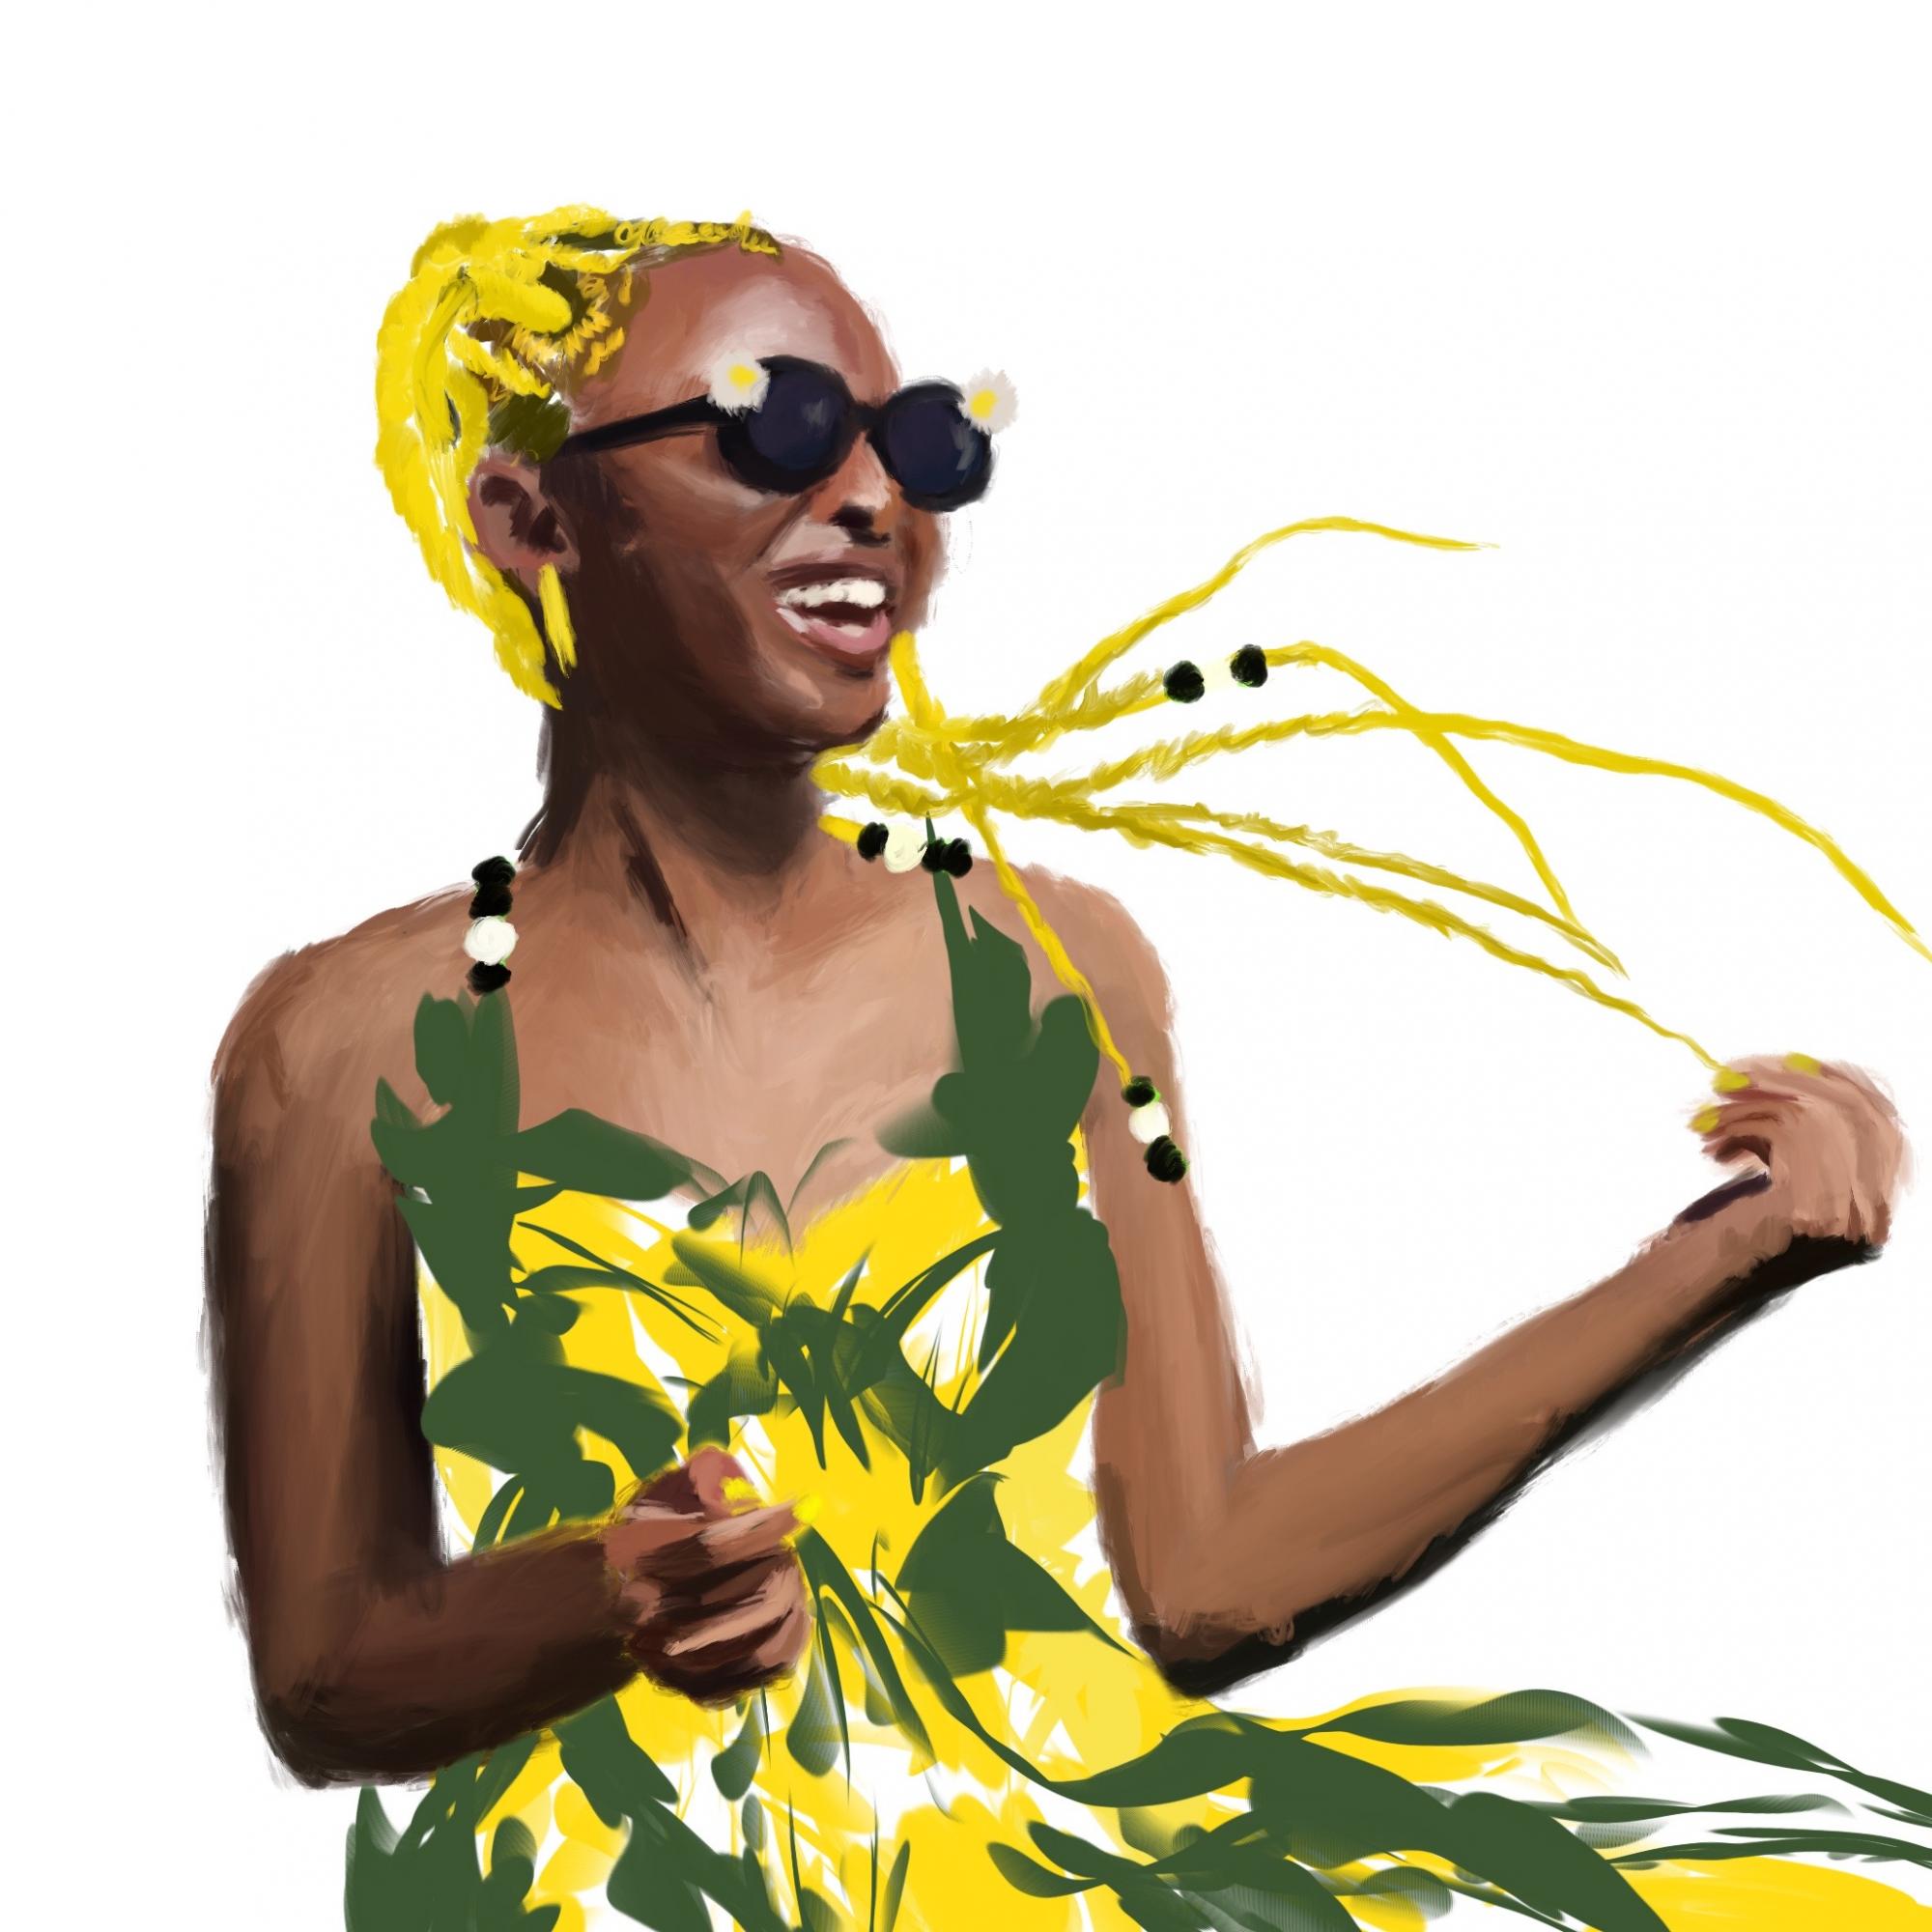 Black girl laughing and dancing in yellow braids and sundress